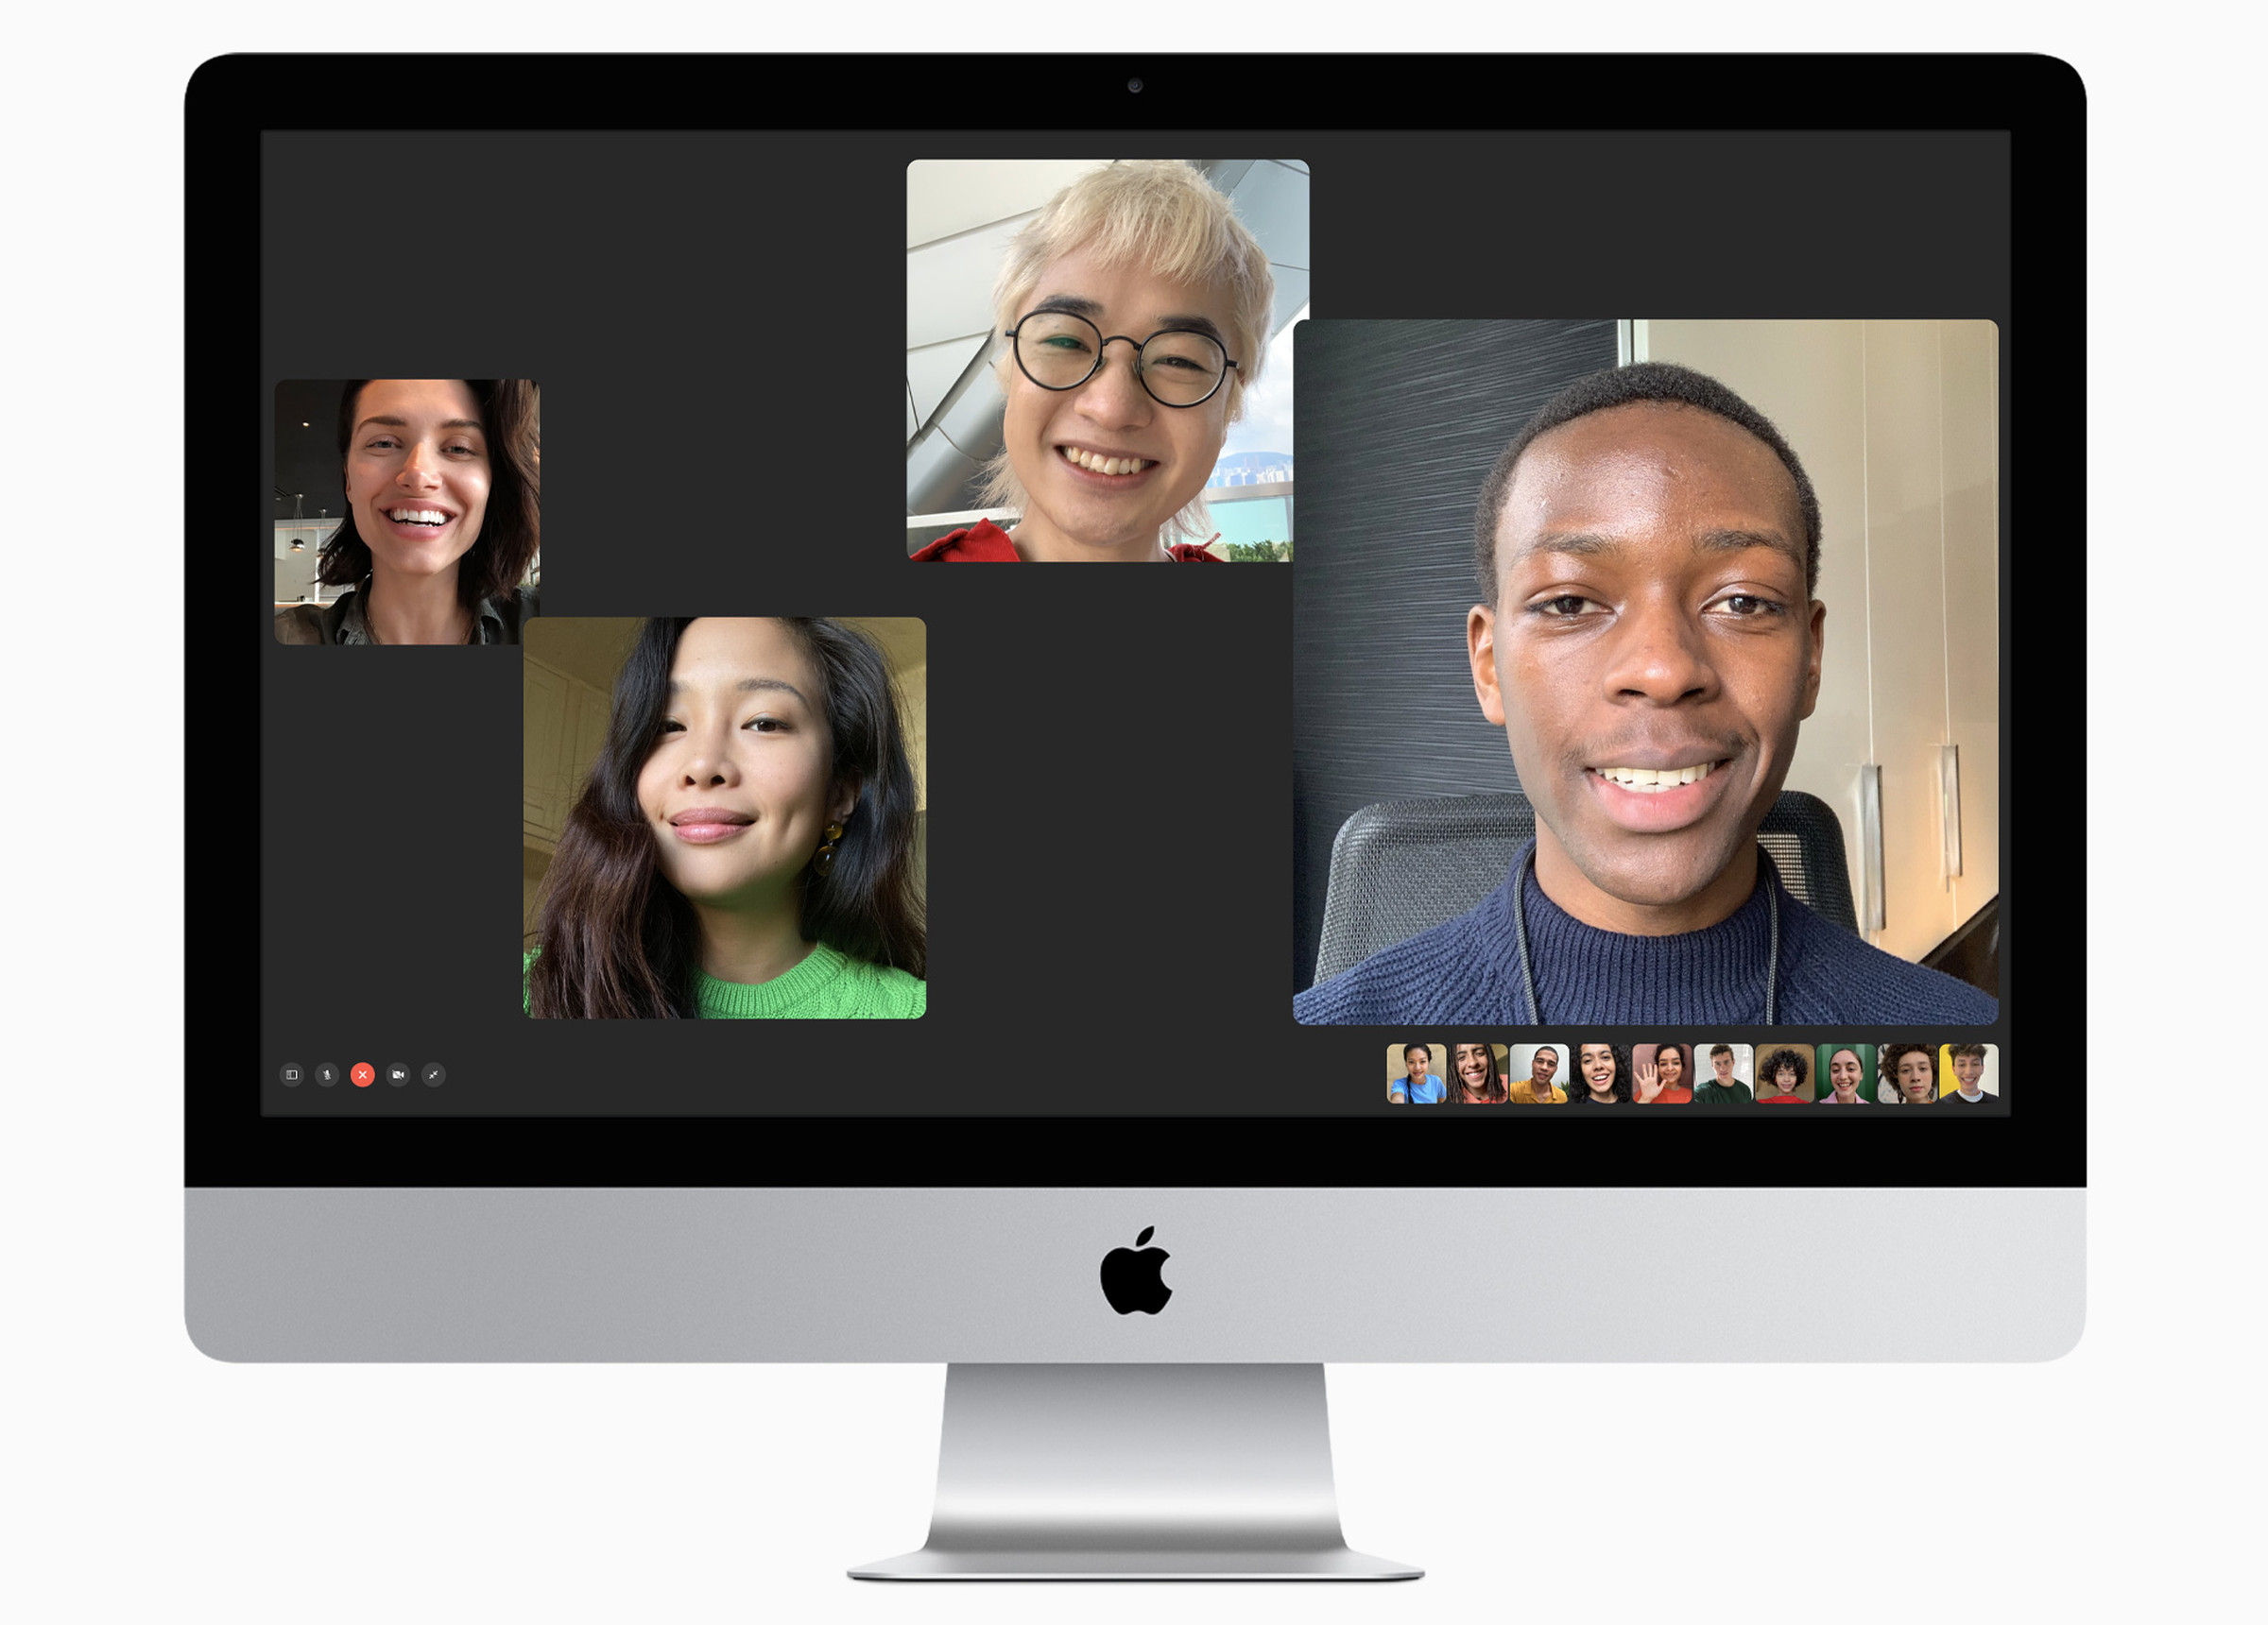 Apple has upgraded the webcam to a higher-resolution 1080p sensor.